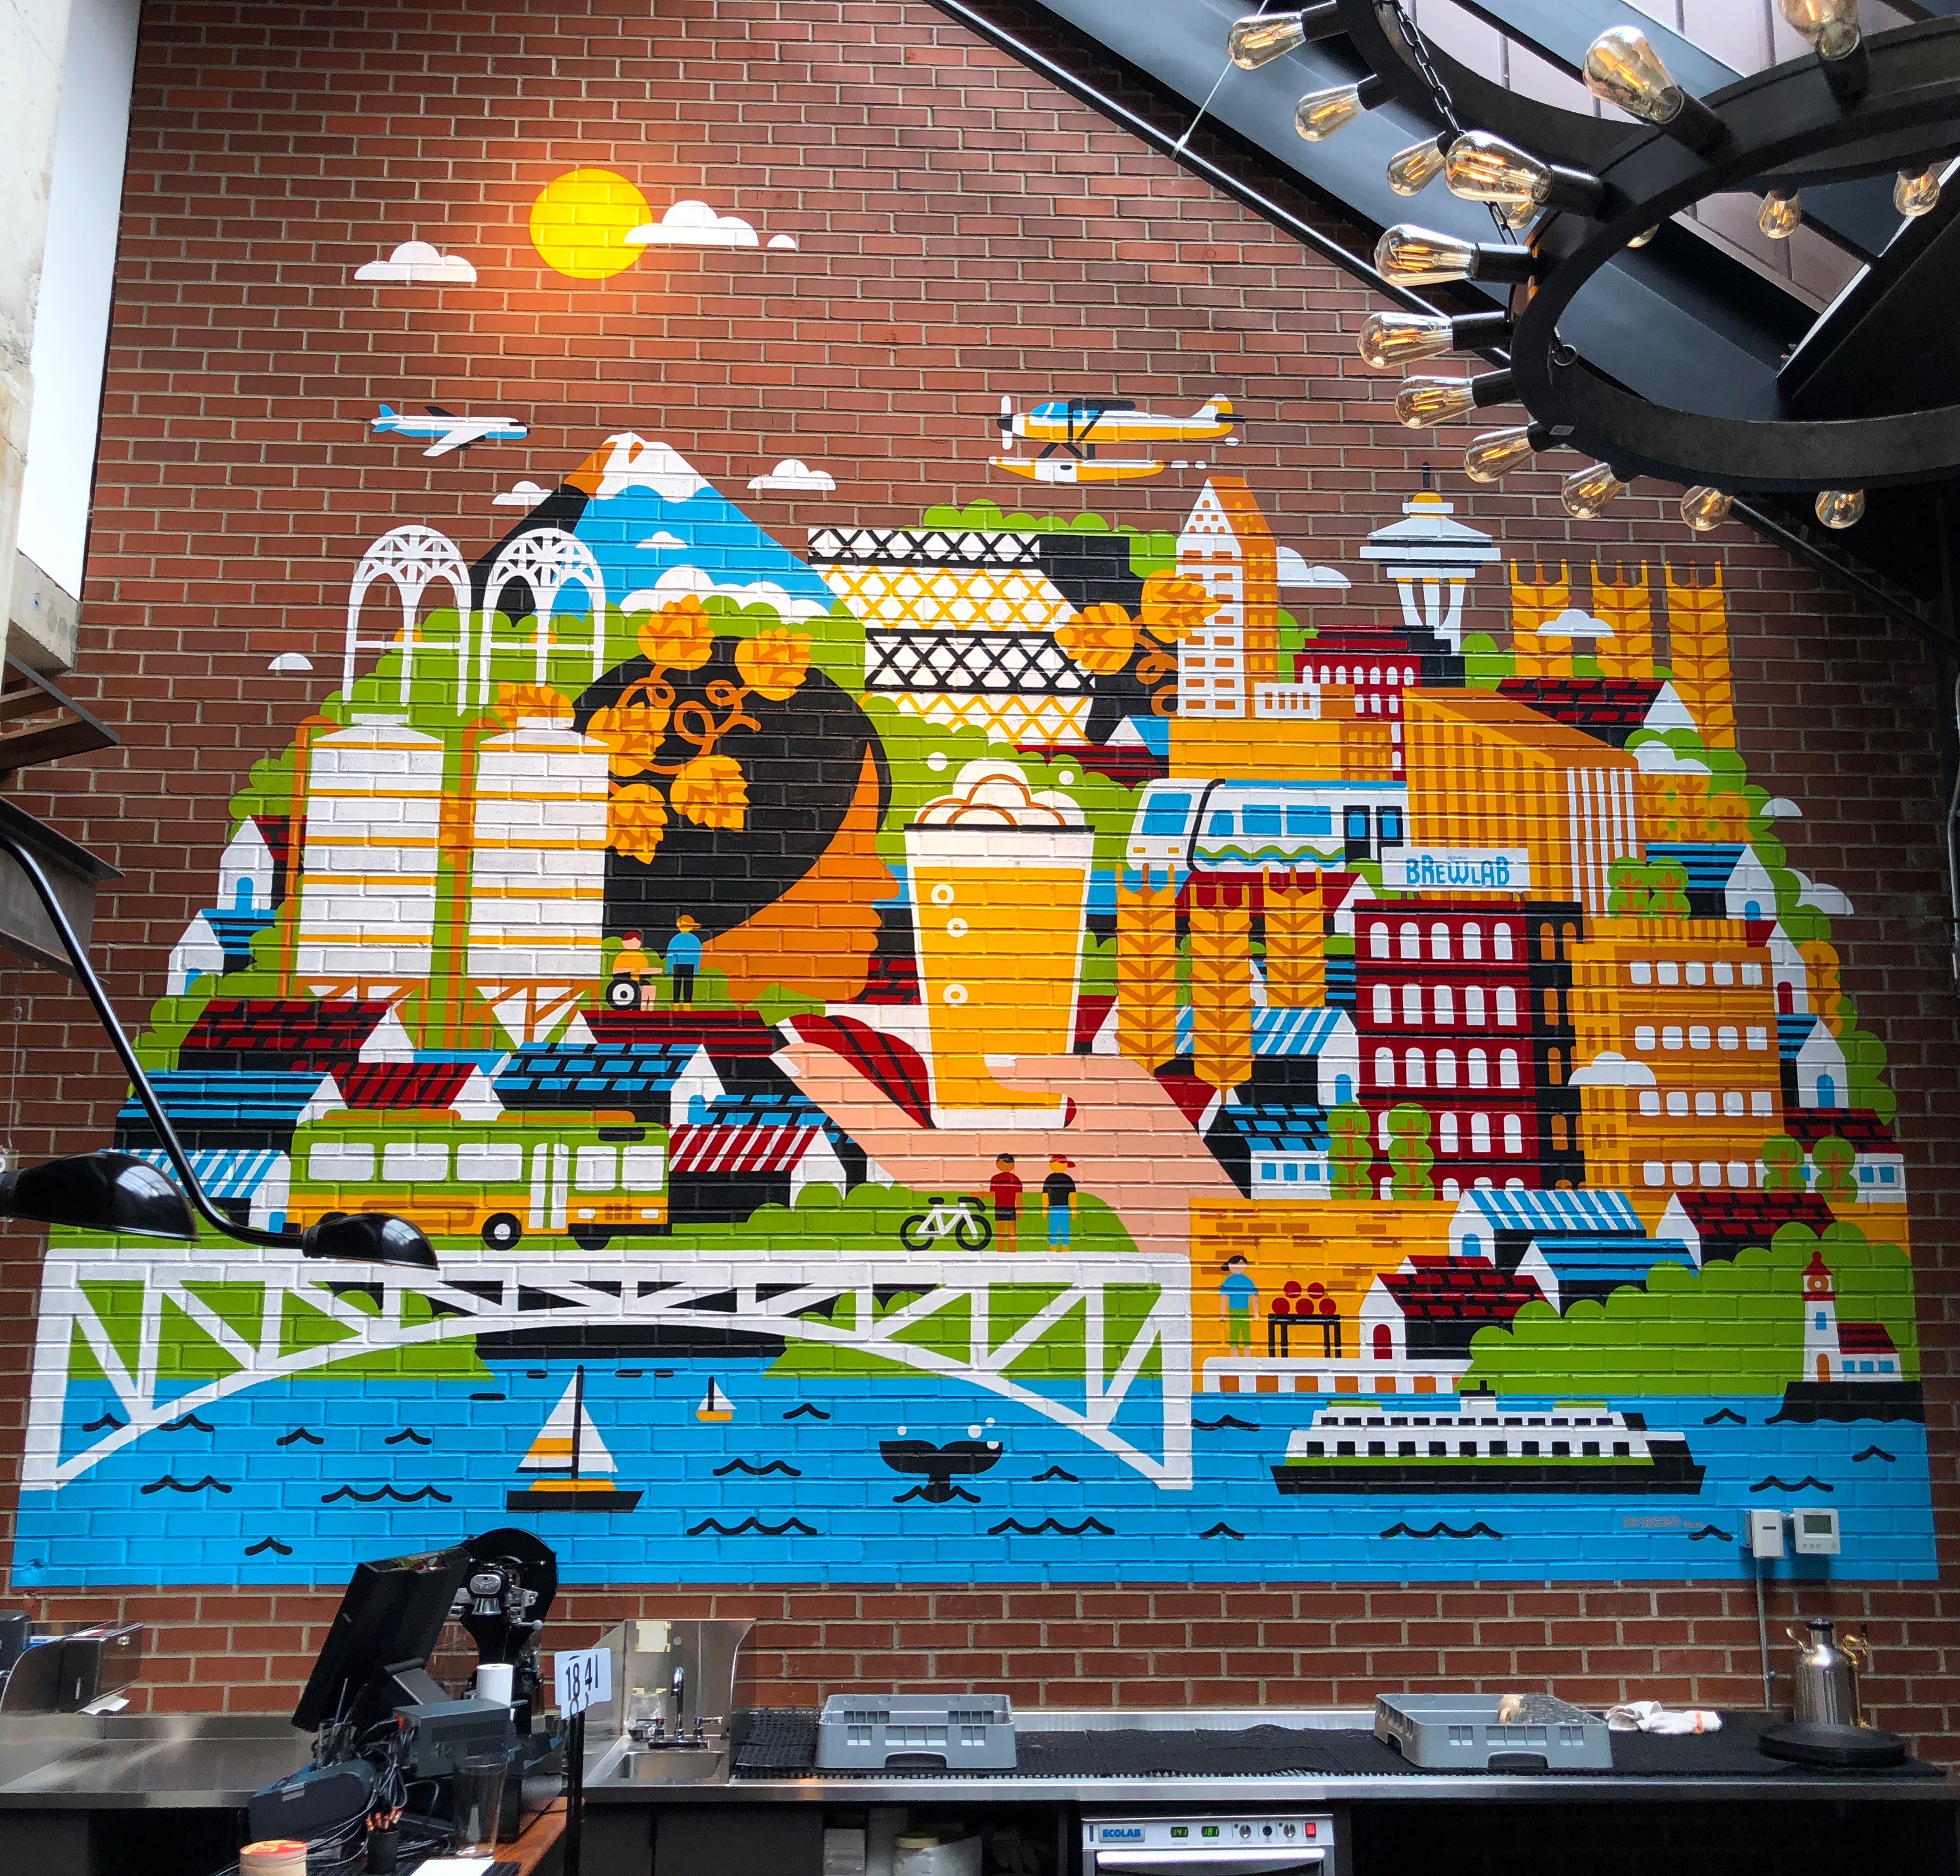 A stunning mural at the new Redhook BrewLab in Seattle, Washington.